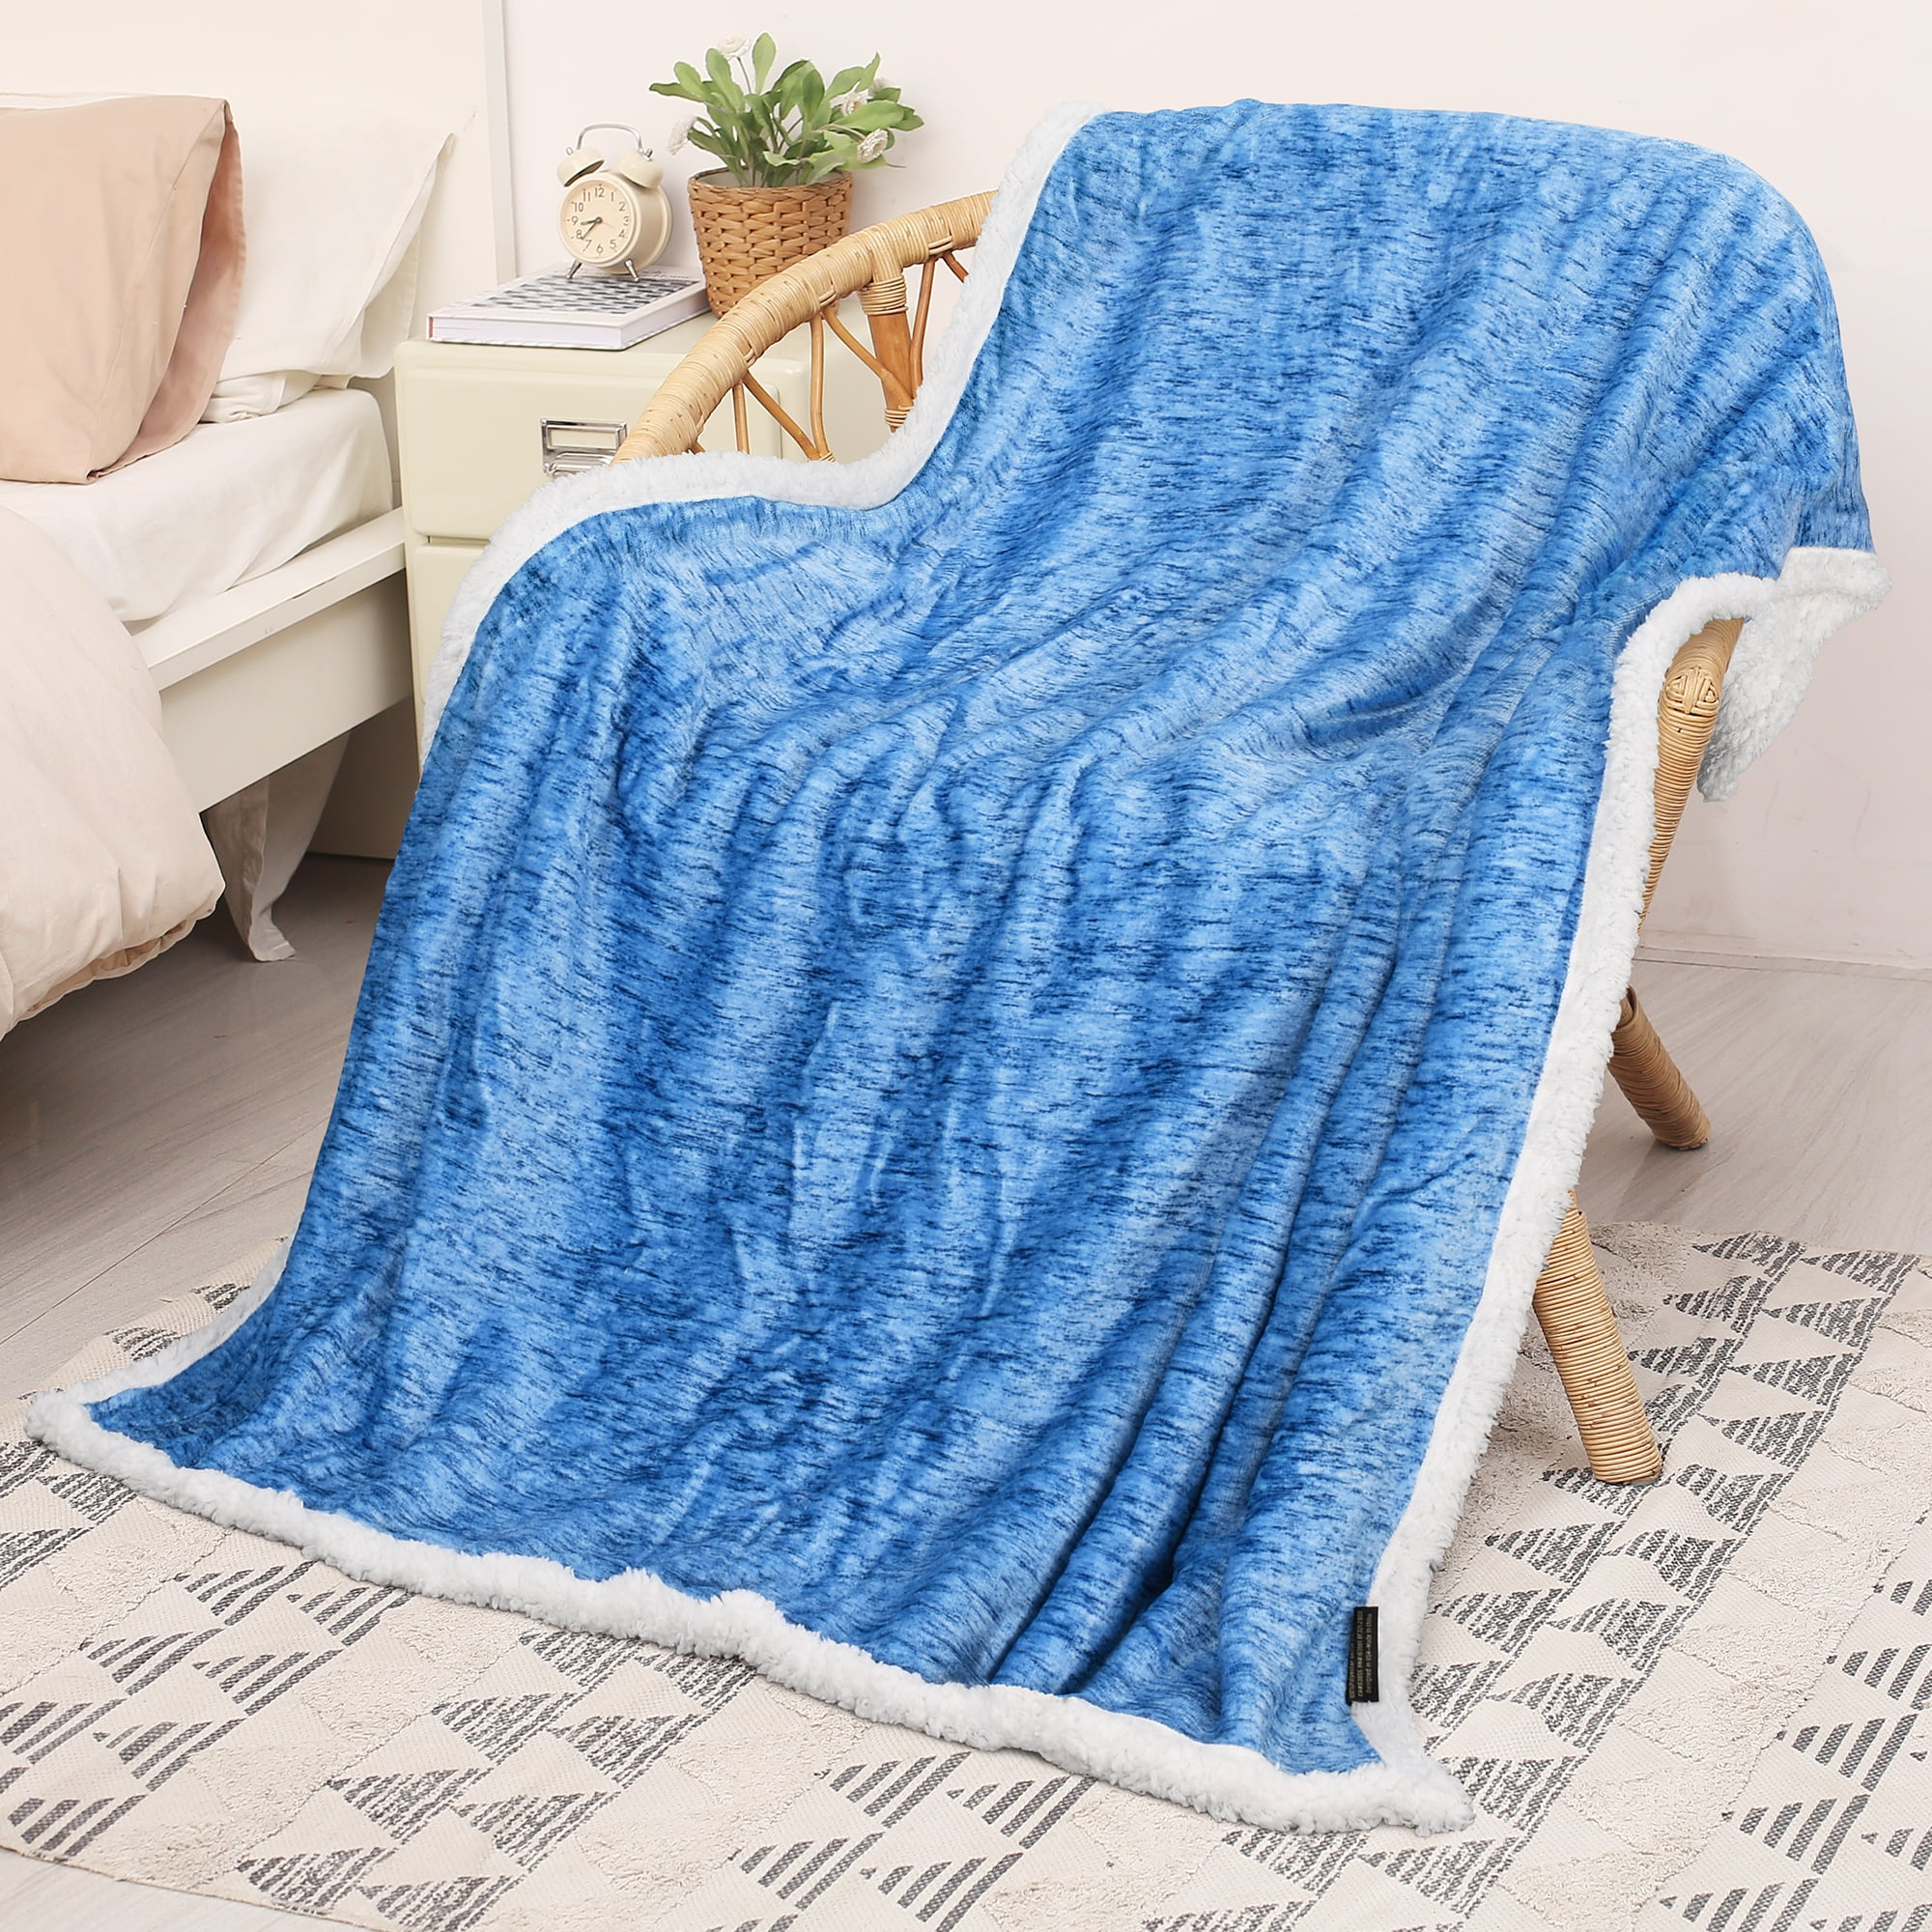 Chickwin Solid Color Sherpa Fleece Blanket Throw Blanket for Sofa Warm Cozy  Fluffy Thick Blanket Soft Flannel Blankets Microfiber Throw Blanket for